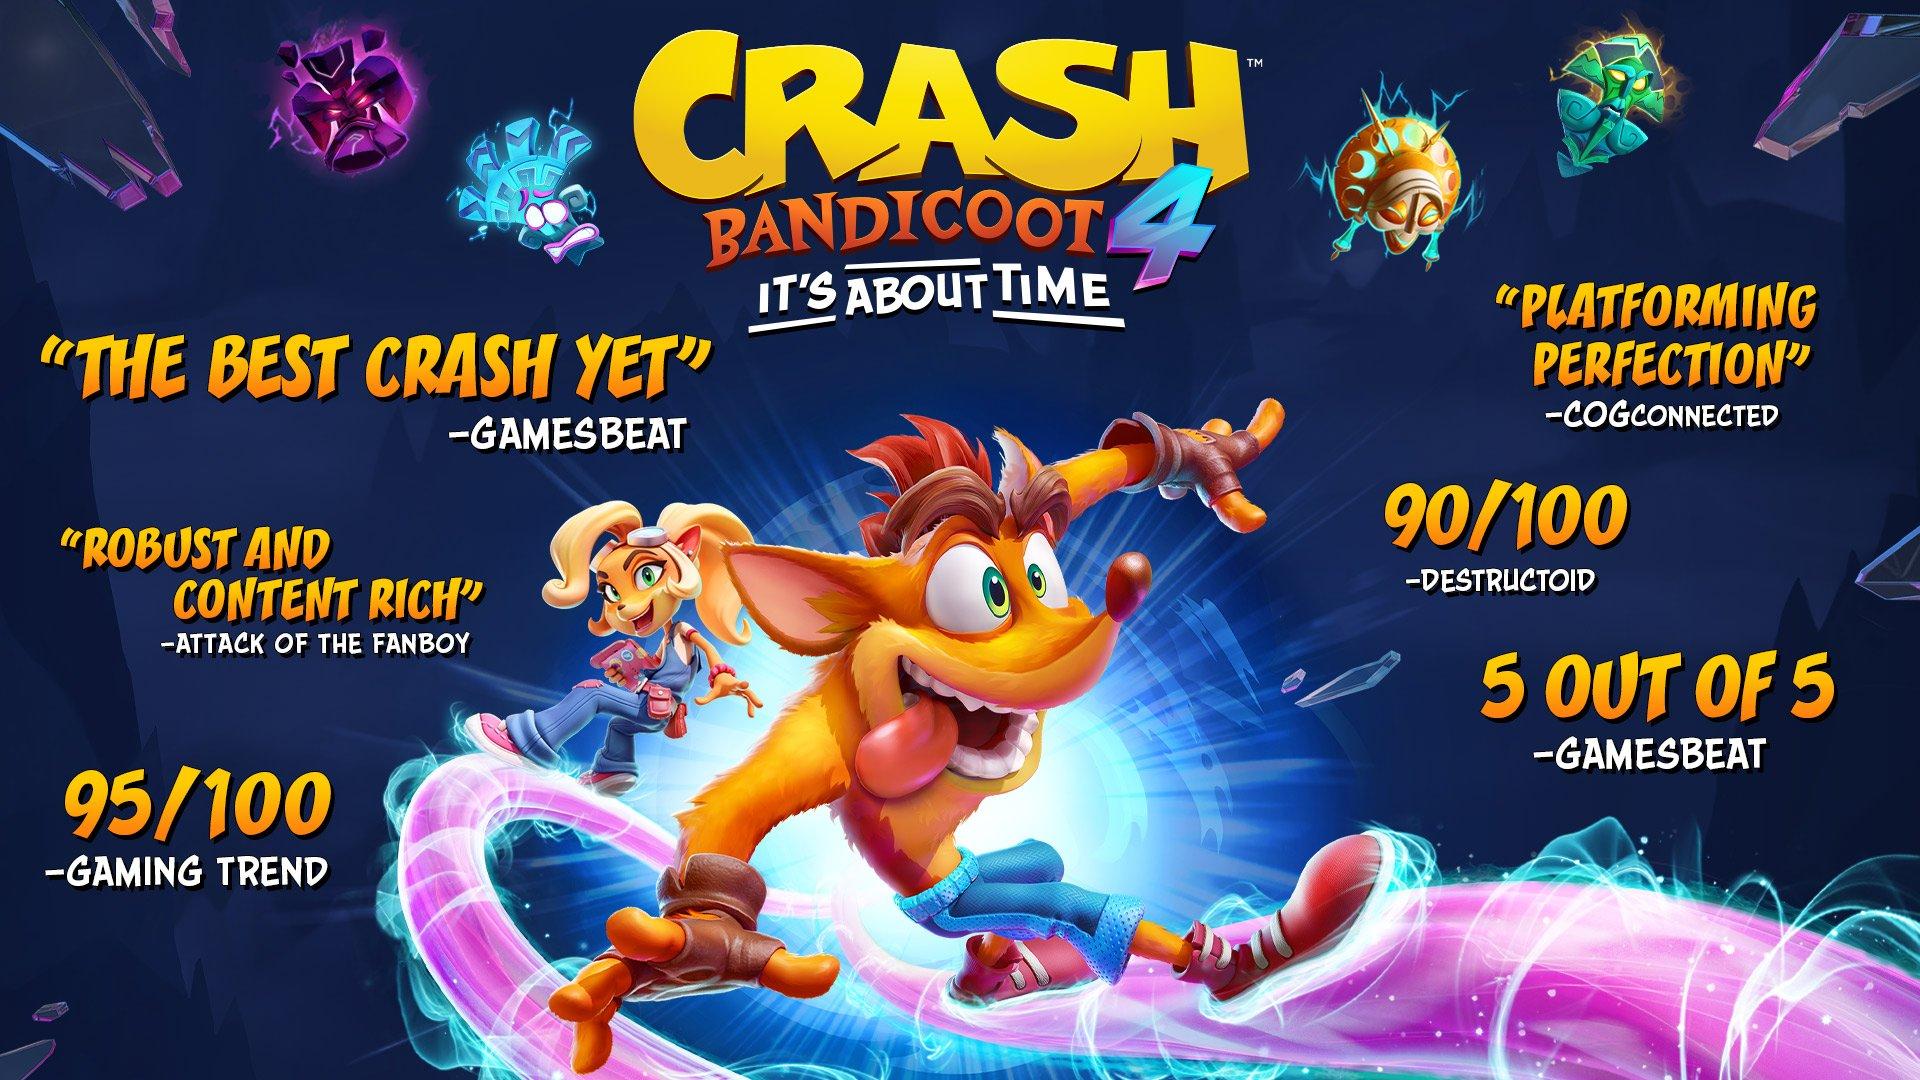 Crash Bandicoot™ 4: It's About Time, Activision, Nintendo Switch 